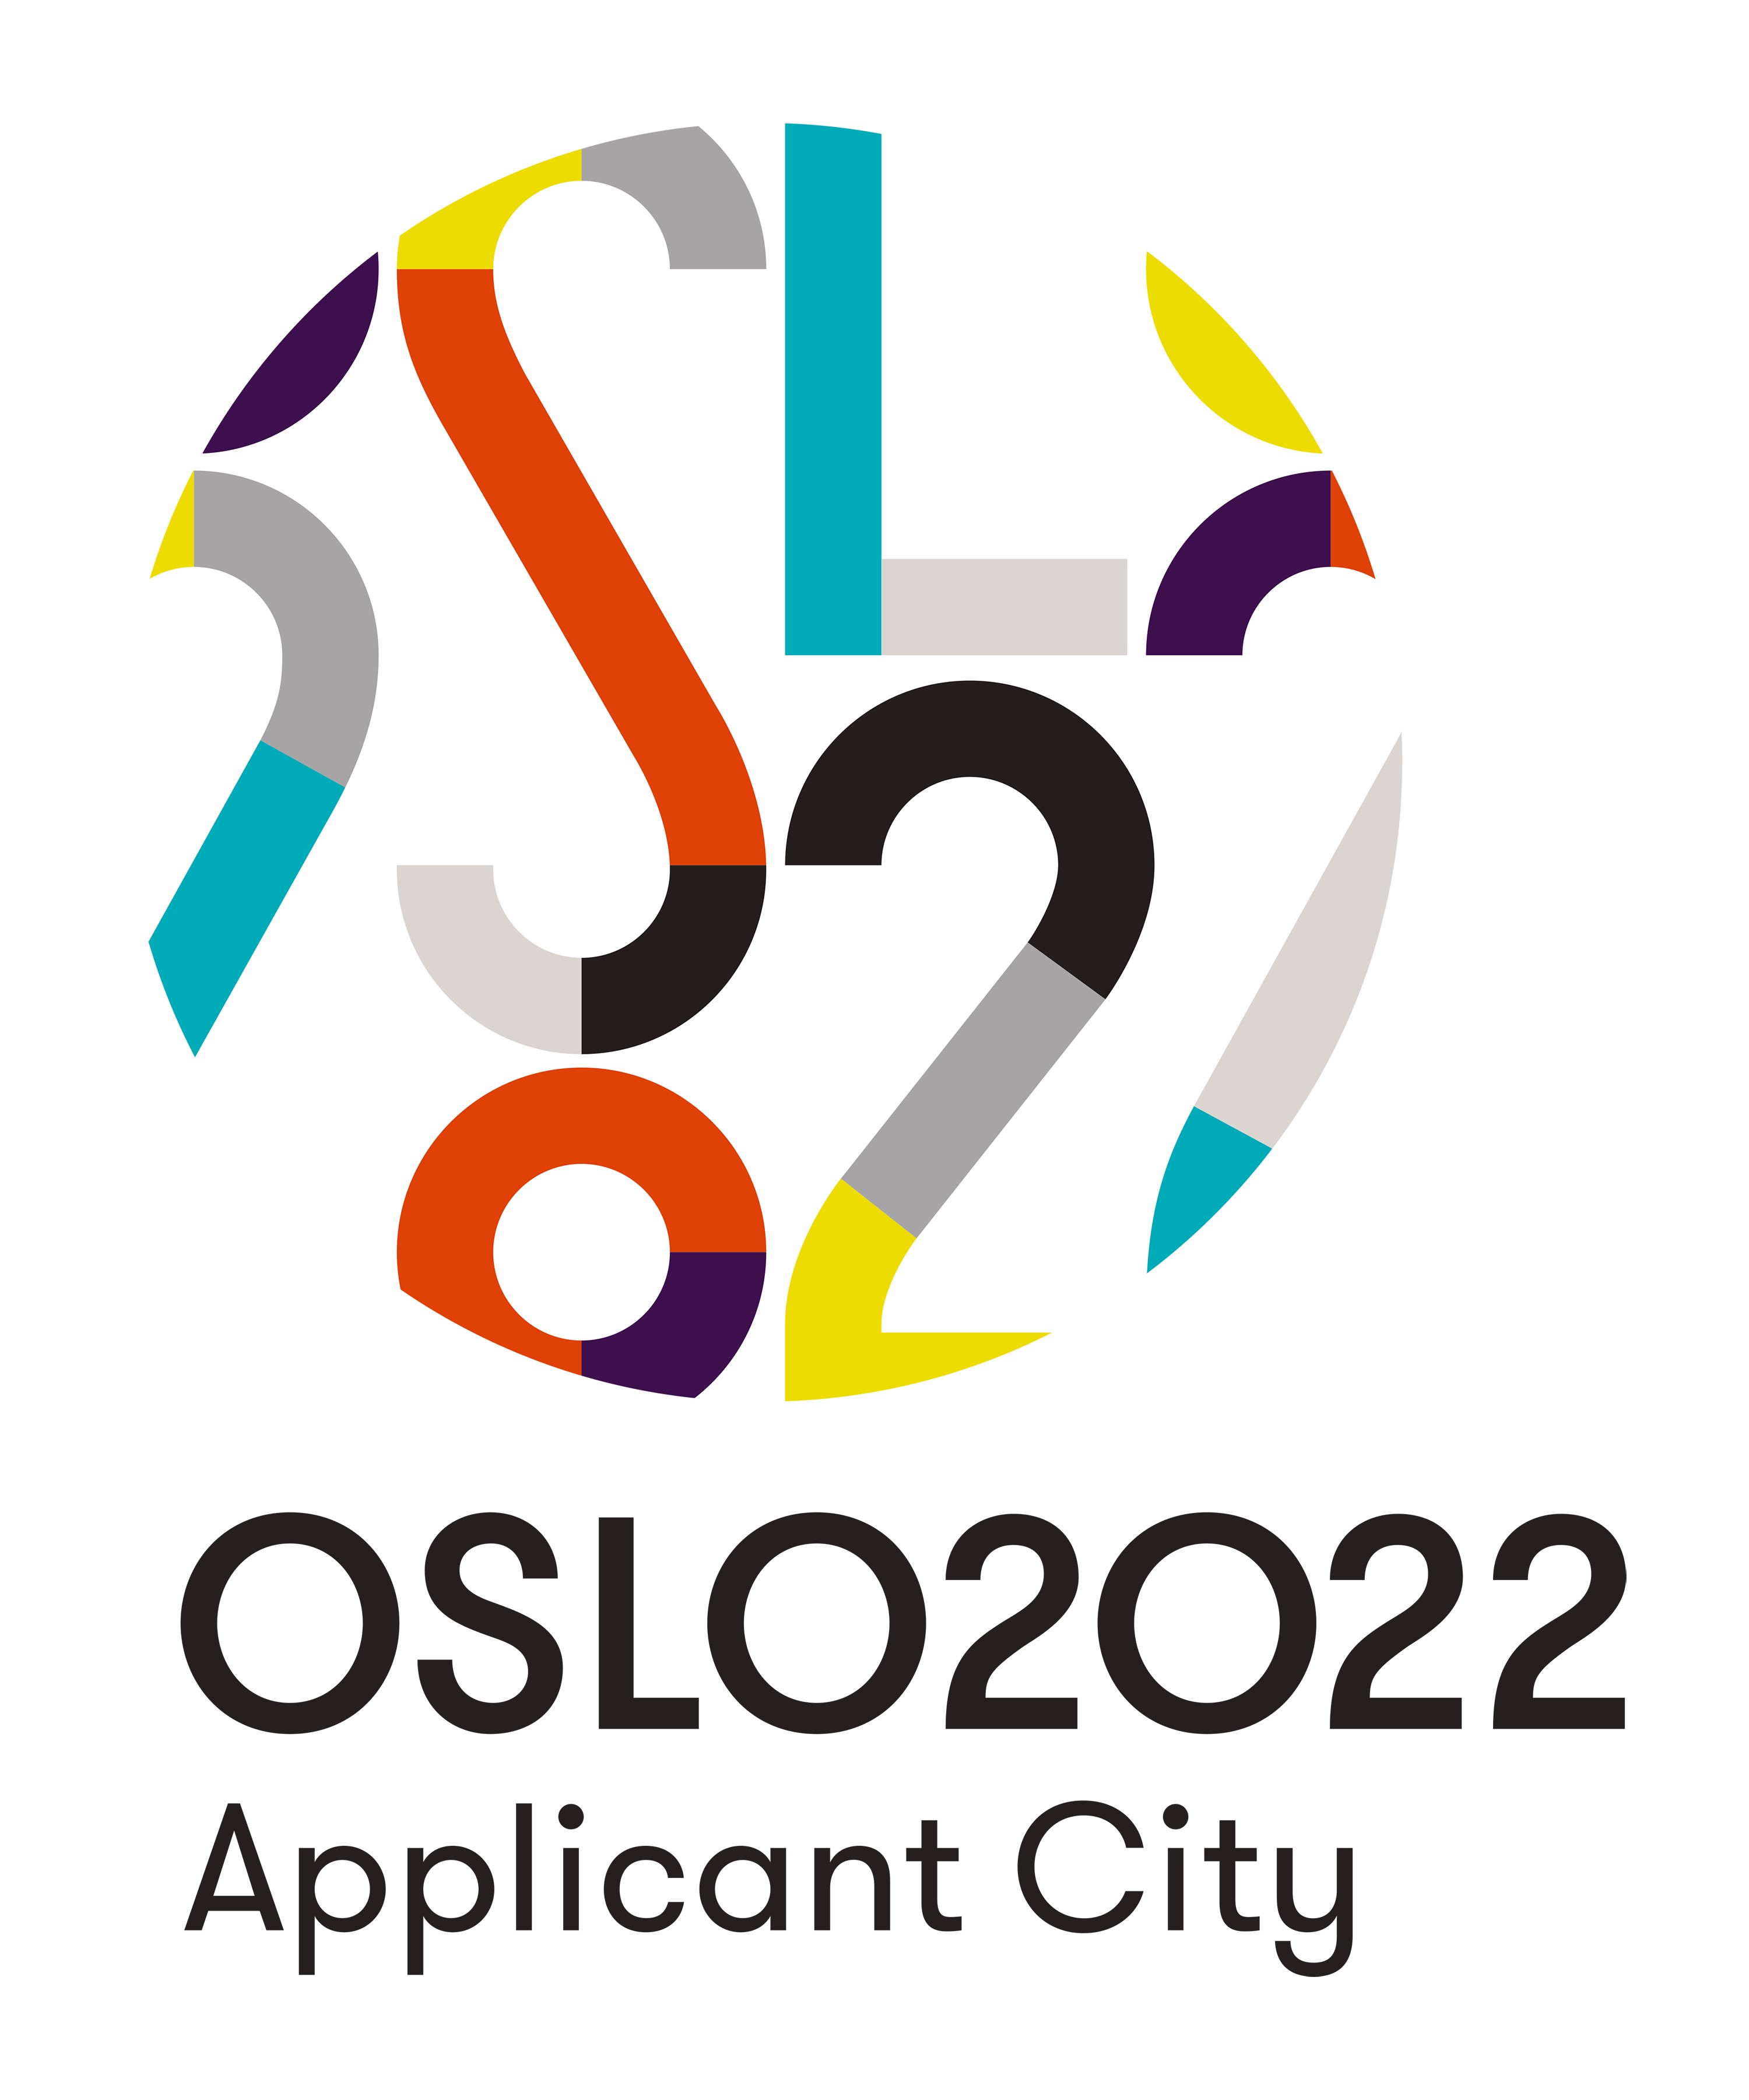 Oslo has unveiled its logo today for the 2022 Olympic and Paralympic Games ©Oslo 2022